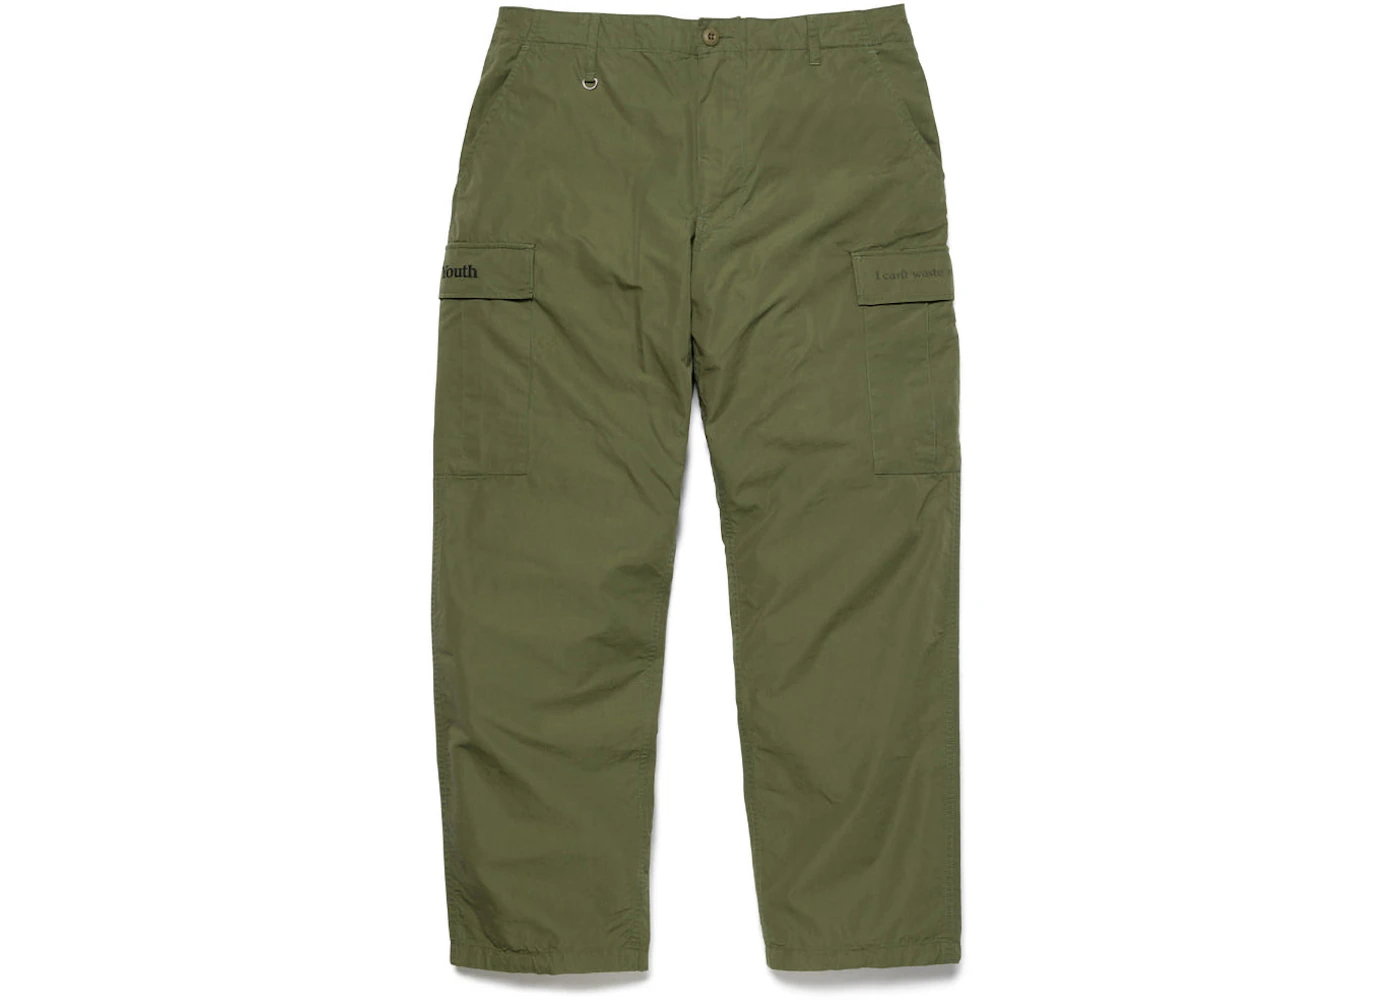 Wasted Youth Cargo Pants Olive Drab Men's - SS23 - US